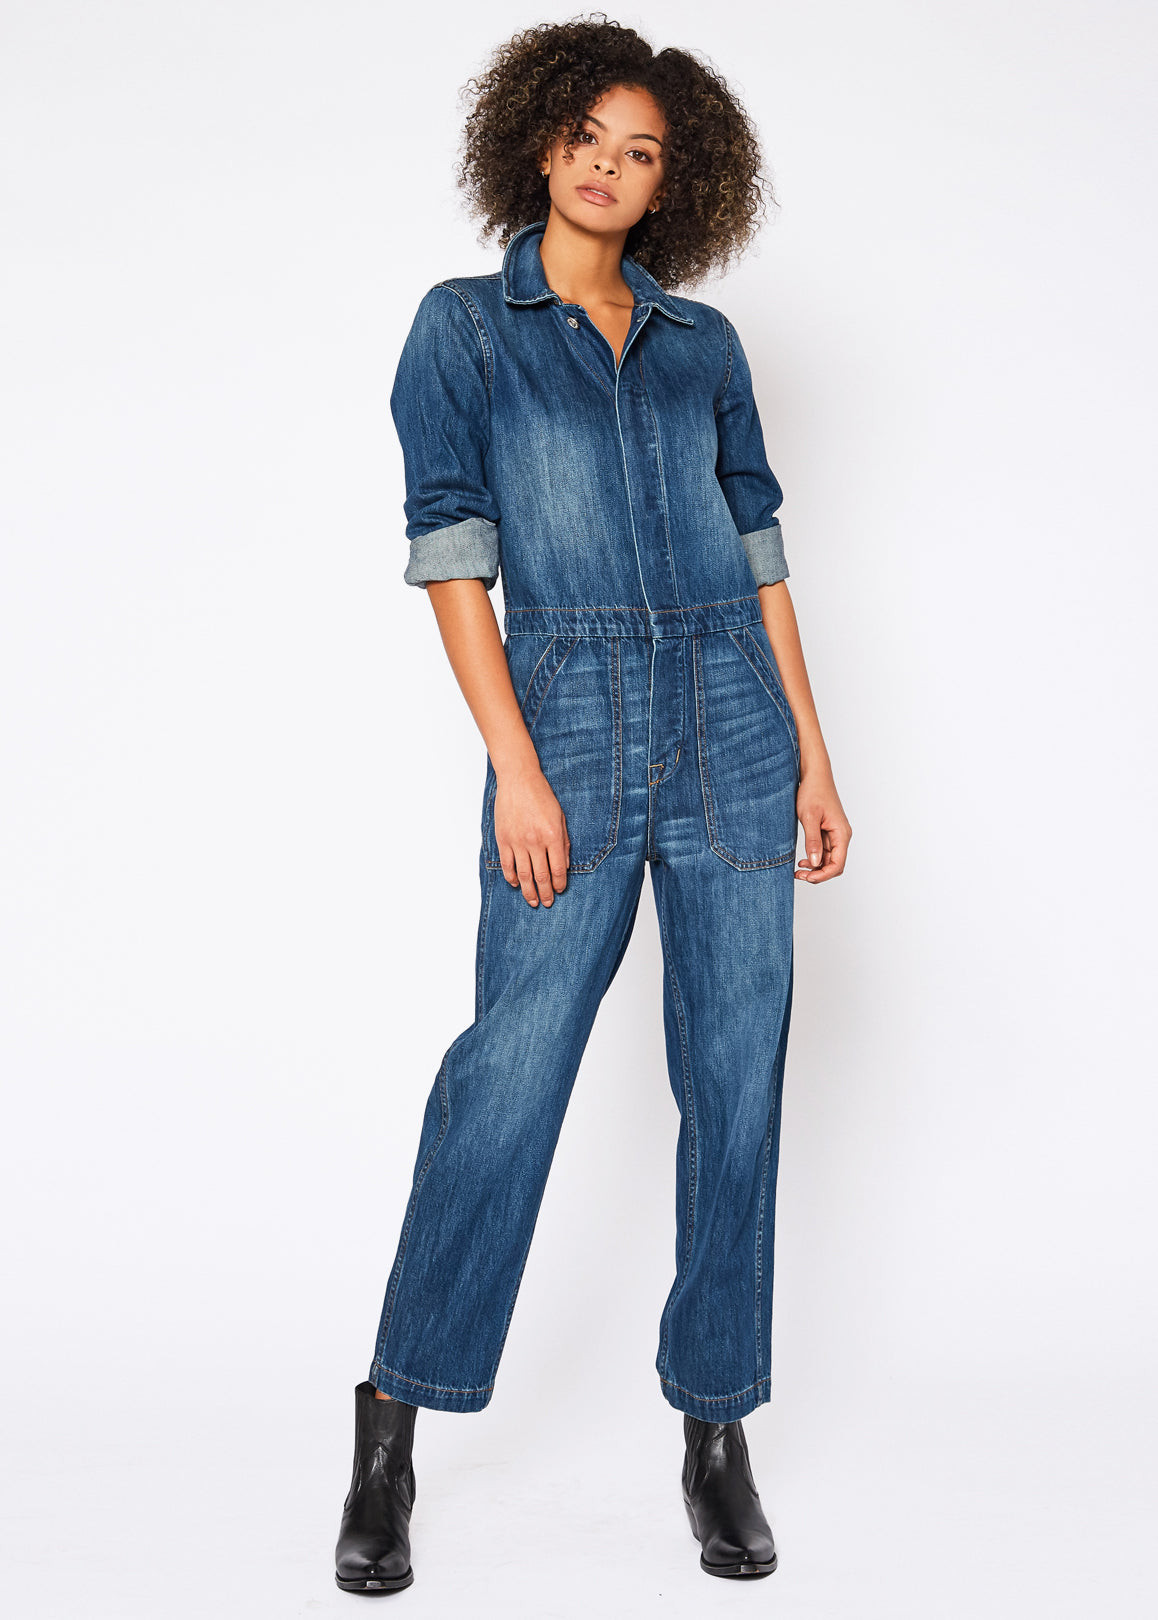 Seventy + Mochi Amelia All-in-One Denim Jumpsuit | Anthropologie Japan -  Women's Clothing, Accessories & Home